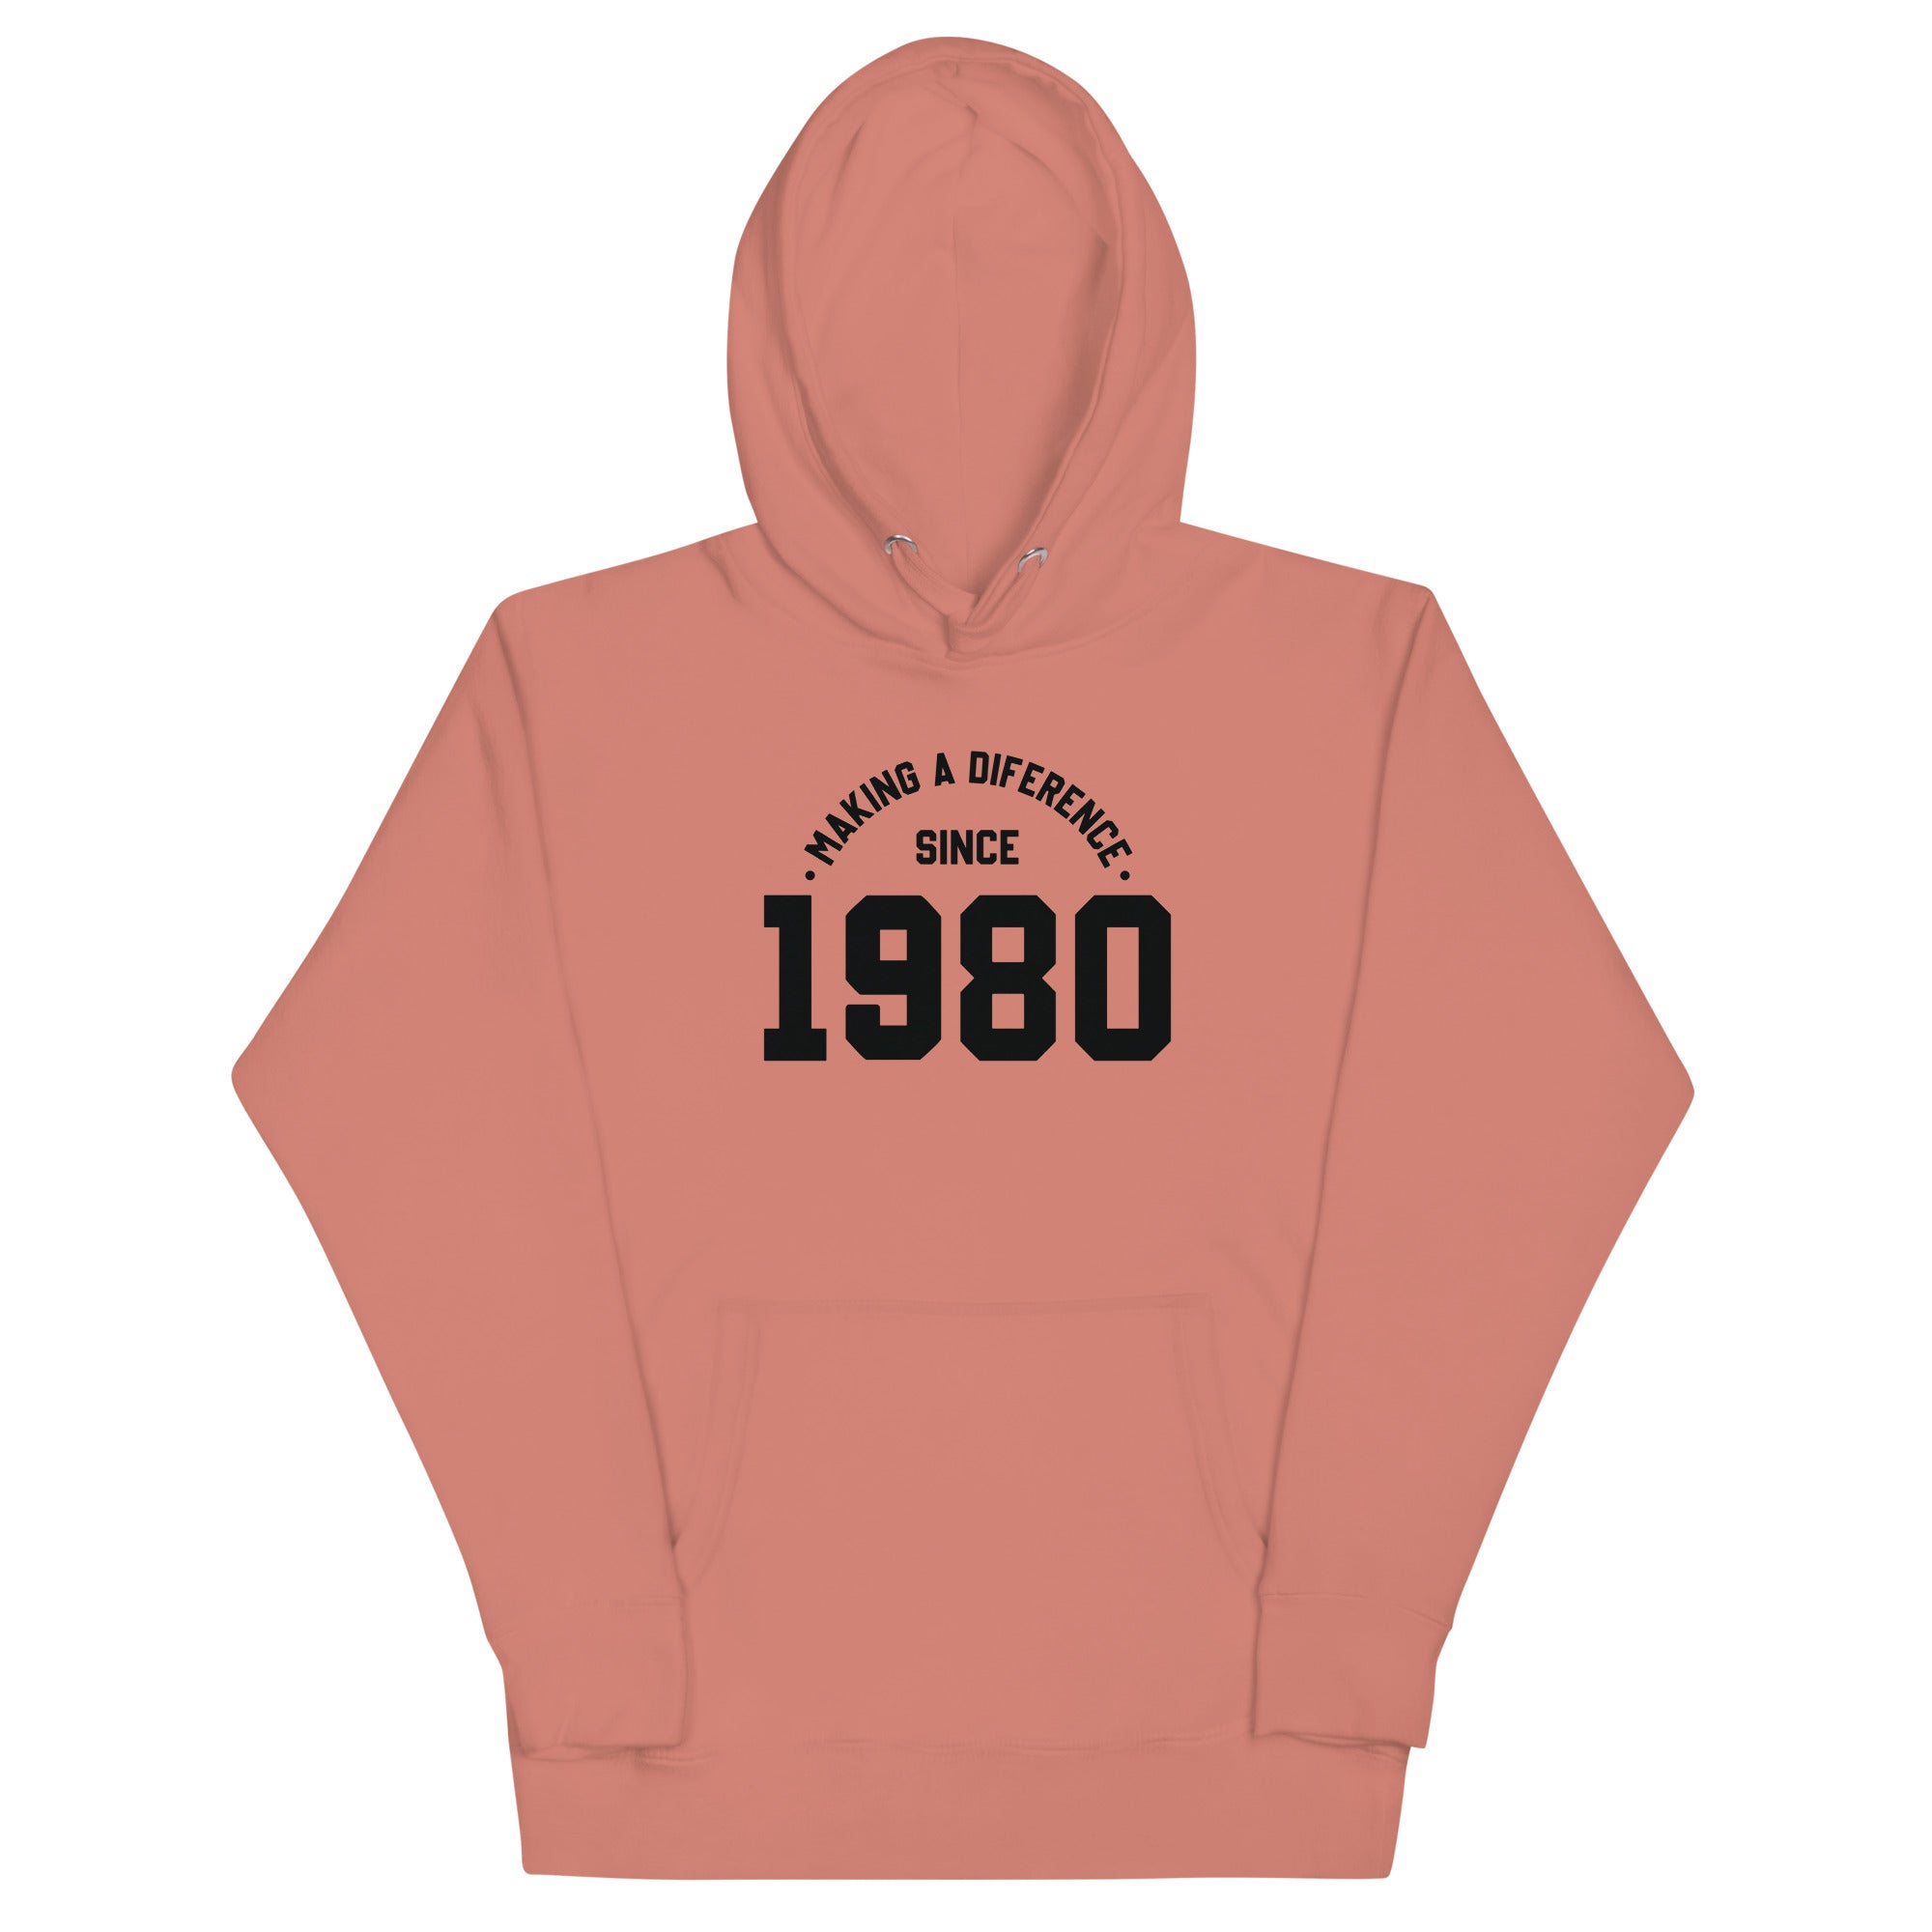 Unisex Hoodie | Making a diference since 1980